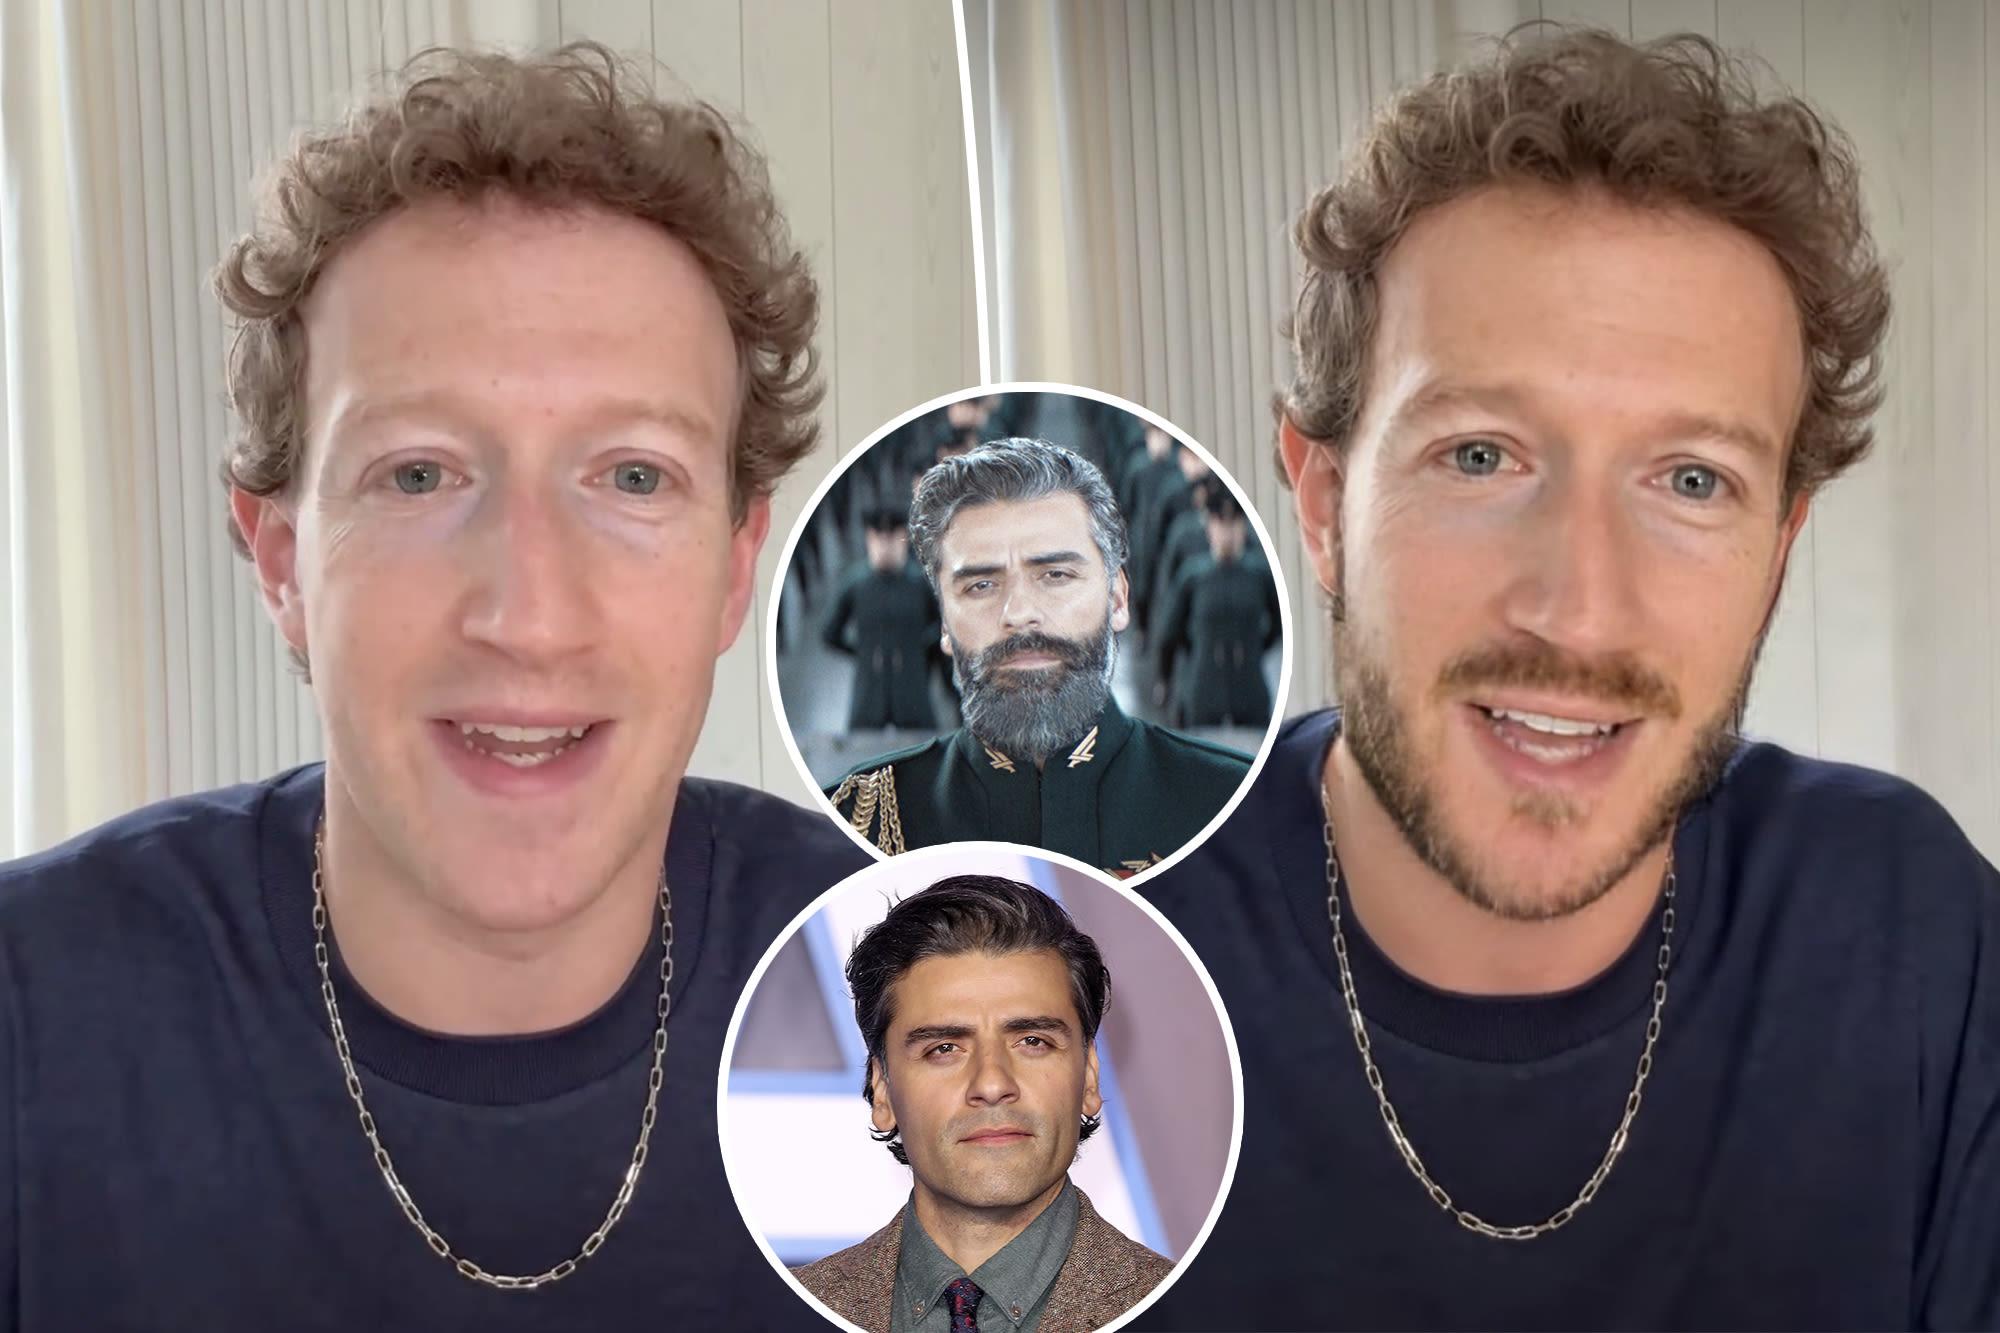 This is the reason why men with facial hair are hotter — could this explain the Mark Zuckerberg ‘beard’ appeal?